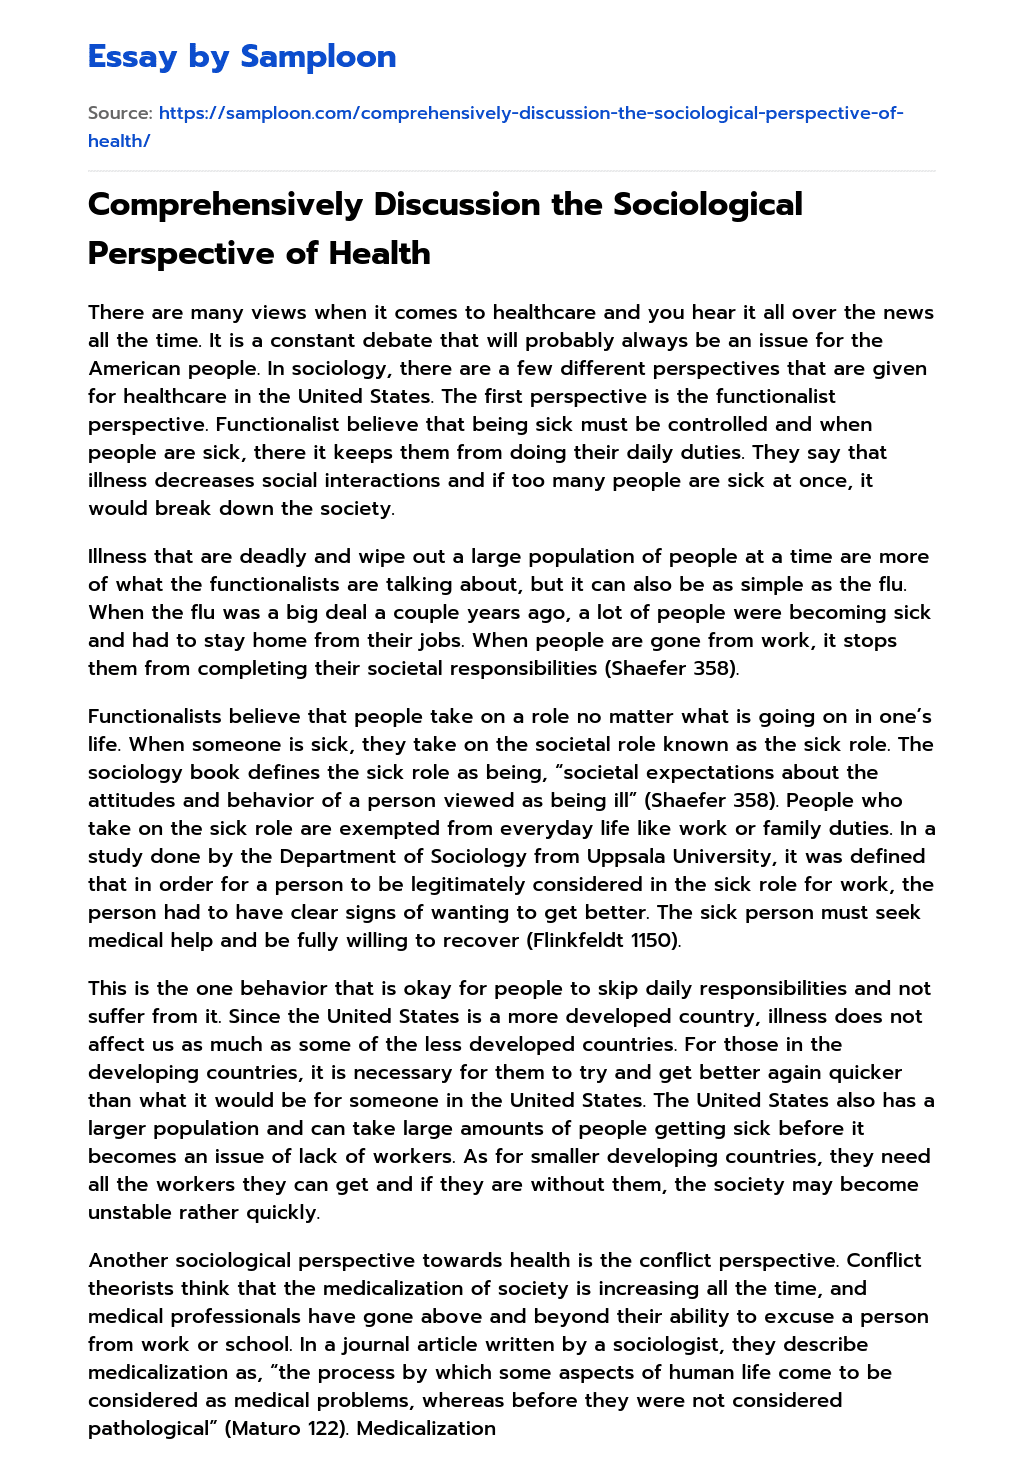 Comprehensively Discussion the Sociological Perspective of Health essay